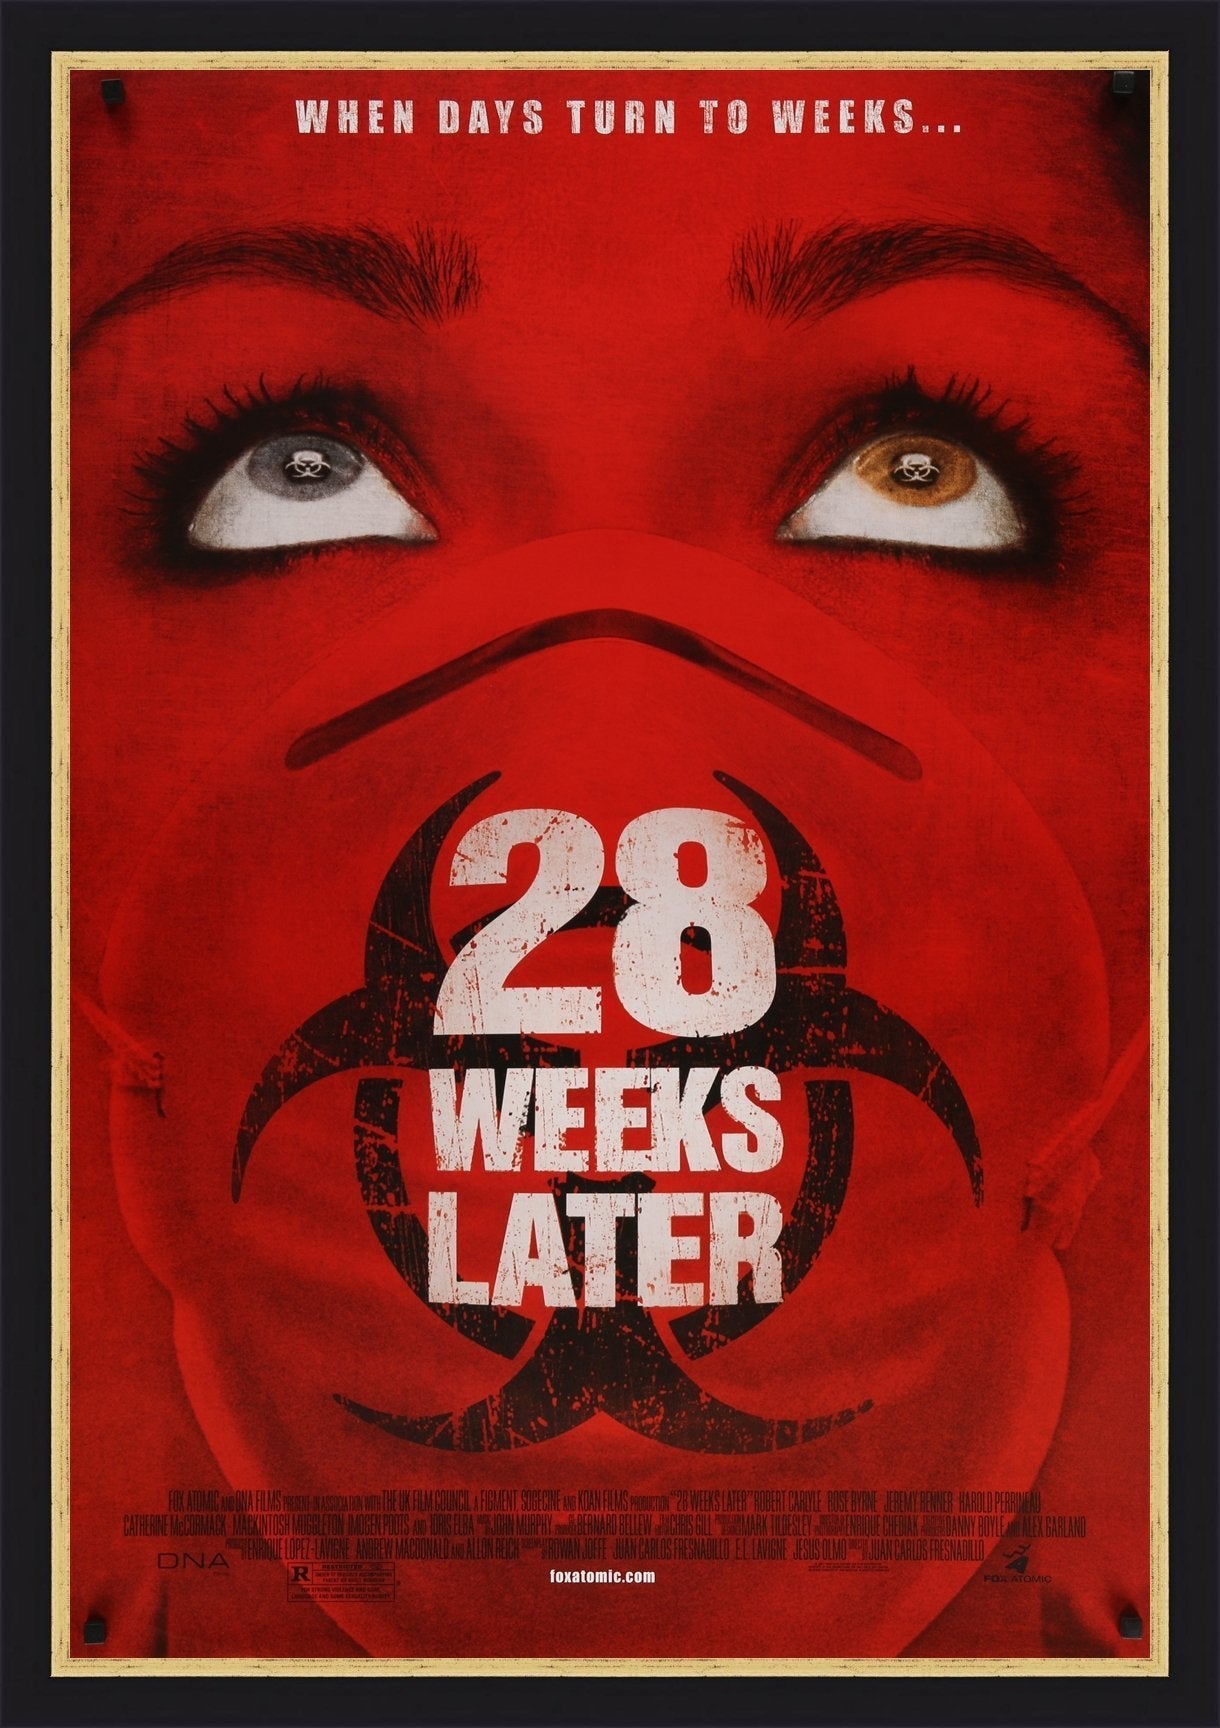 An original movie poster for the zombie film 28 Weeks Later